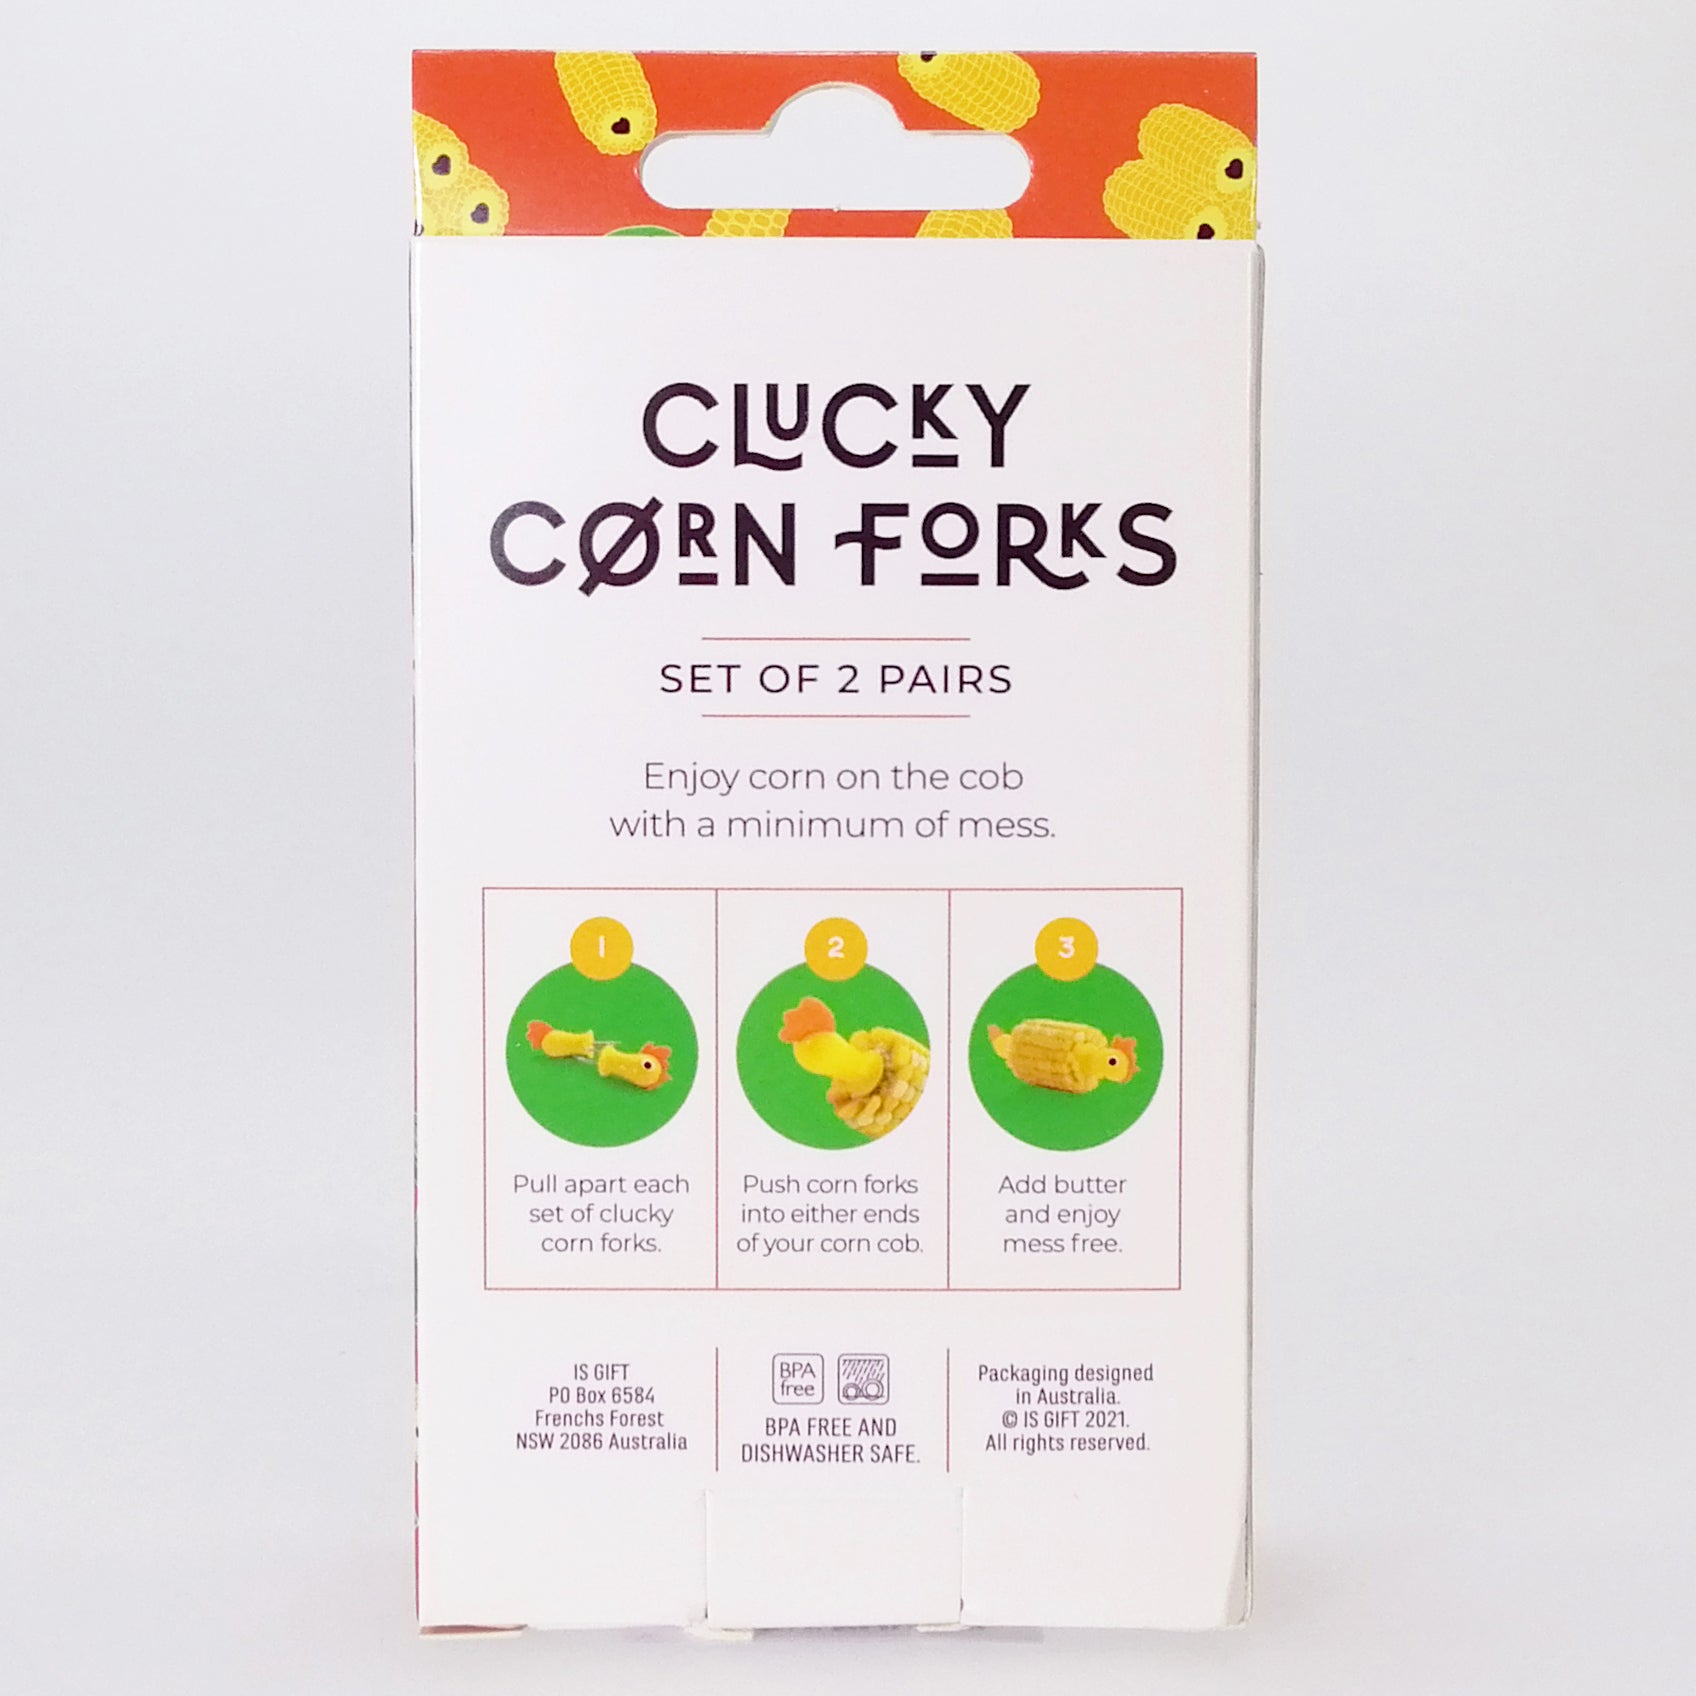 Clucky Corn Forks - Set of 2